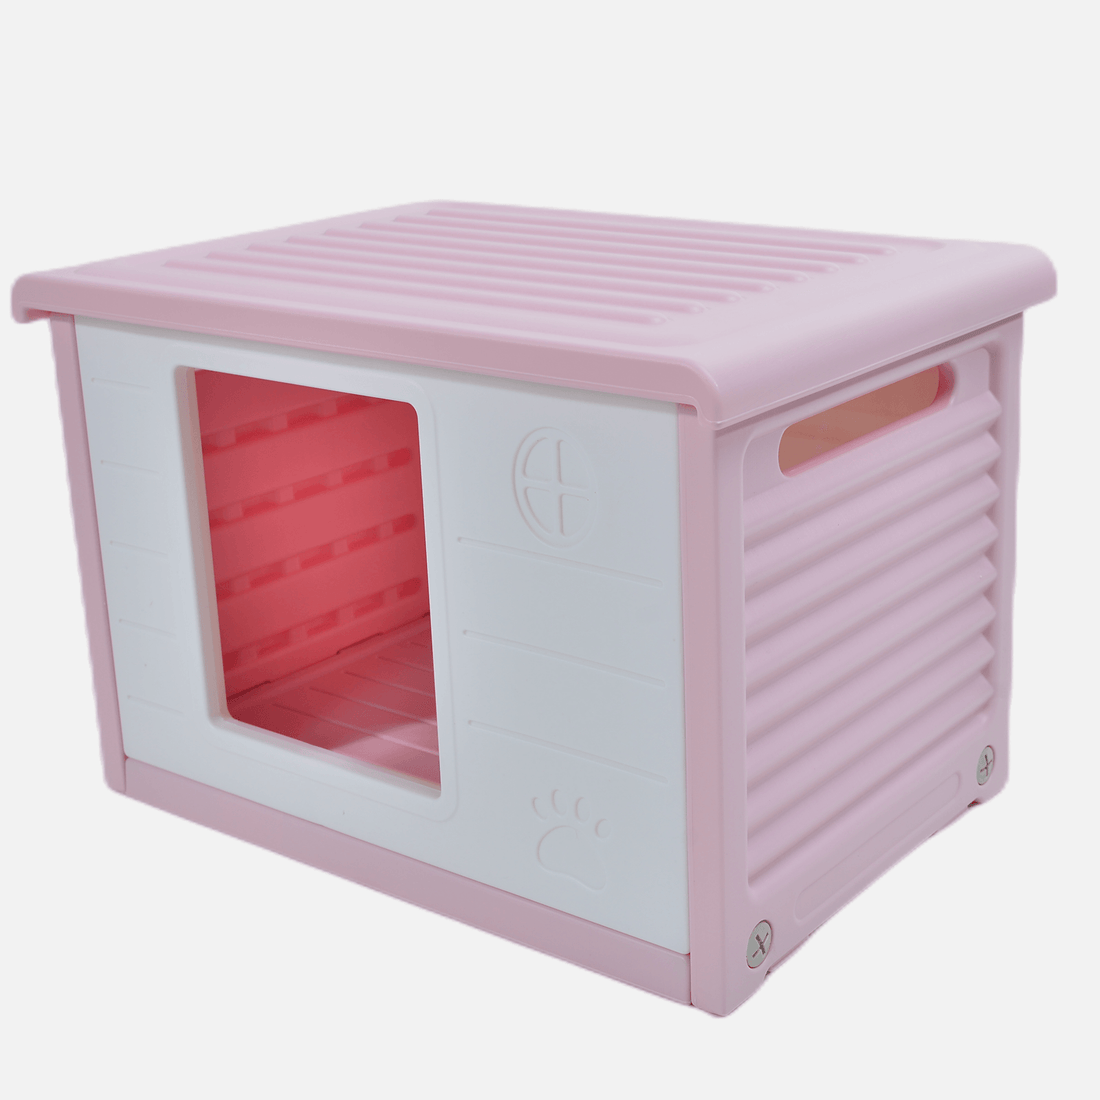 YES4PETS Small Plastic Pet Dog Puppy Cat House Kennel Pink - Pets Gear